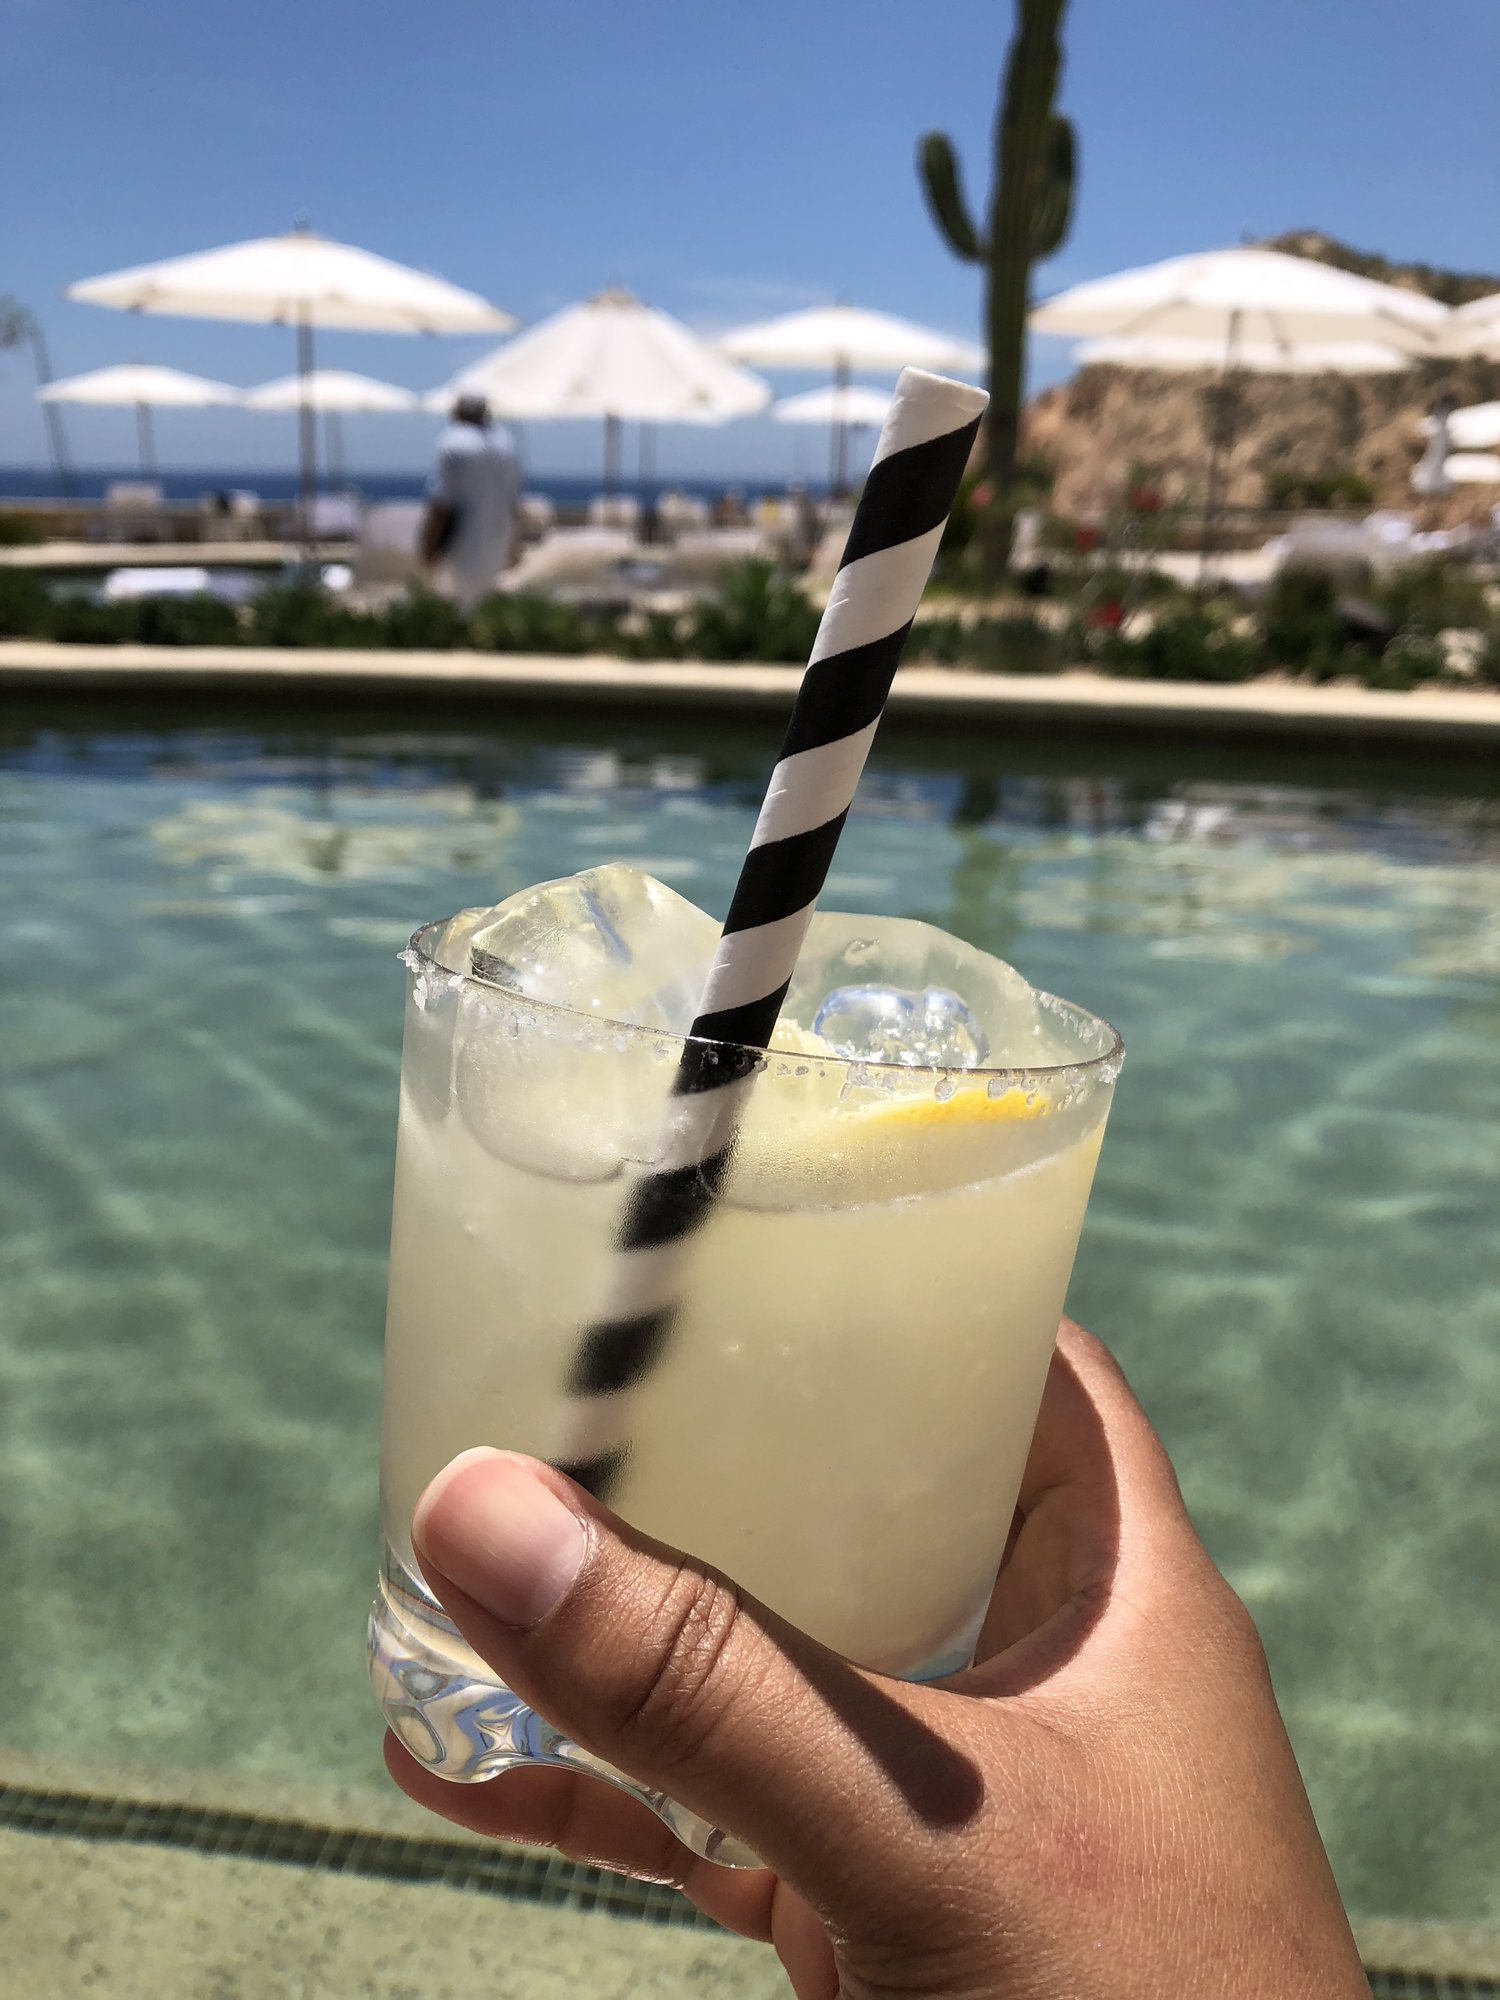 Salud! Such a great Margarita at the Montage Pool!